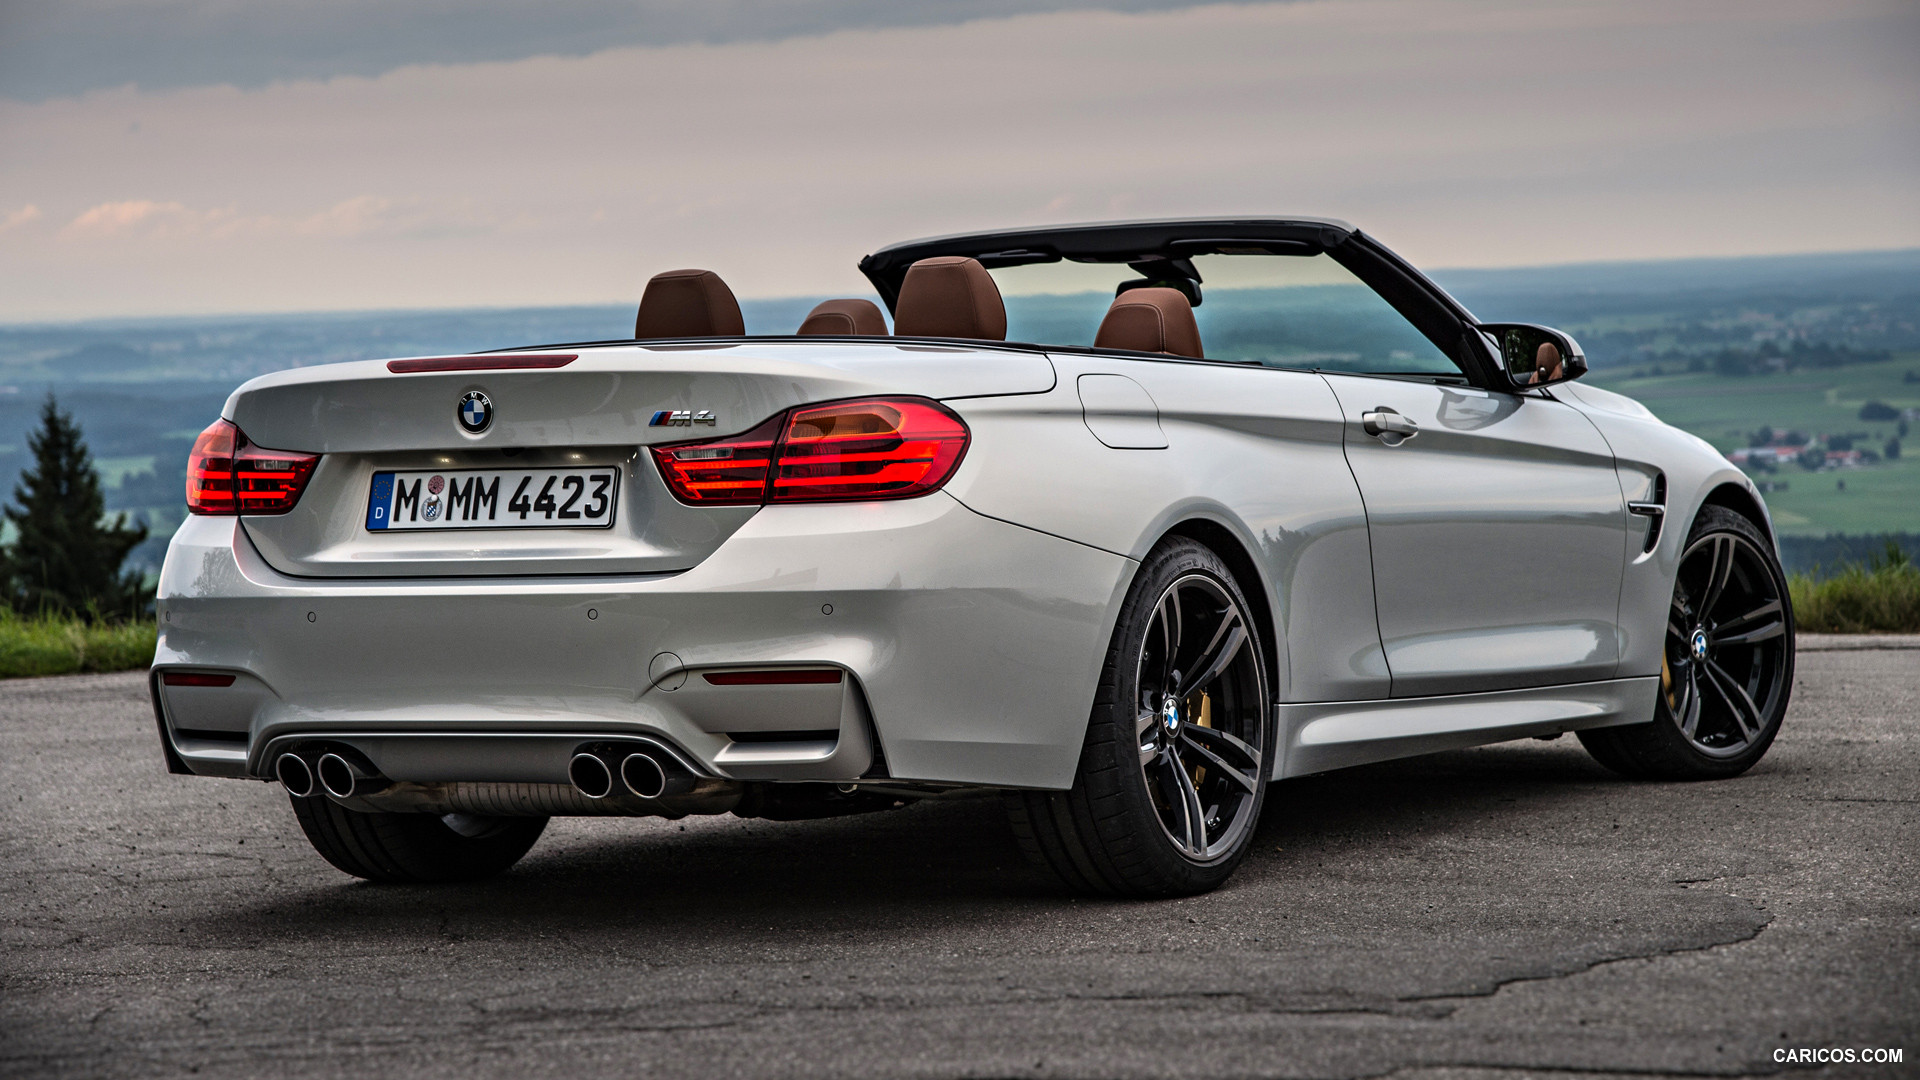 Amazing 2015 BMW M4 Cabrio Pictures & Backgrounds